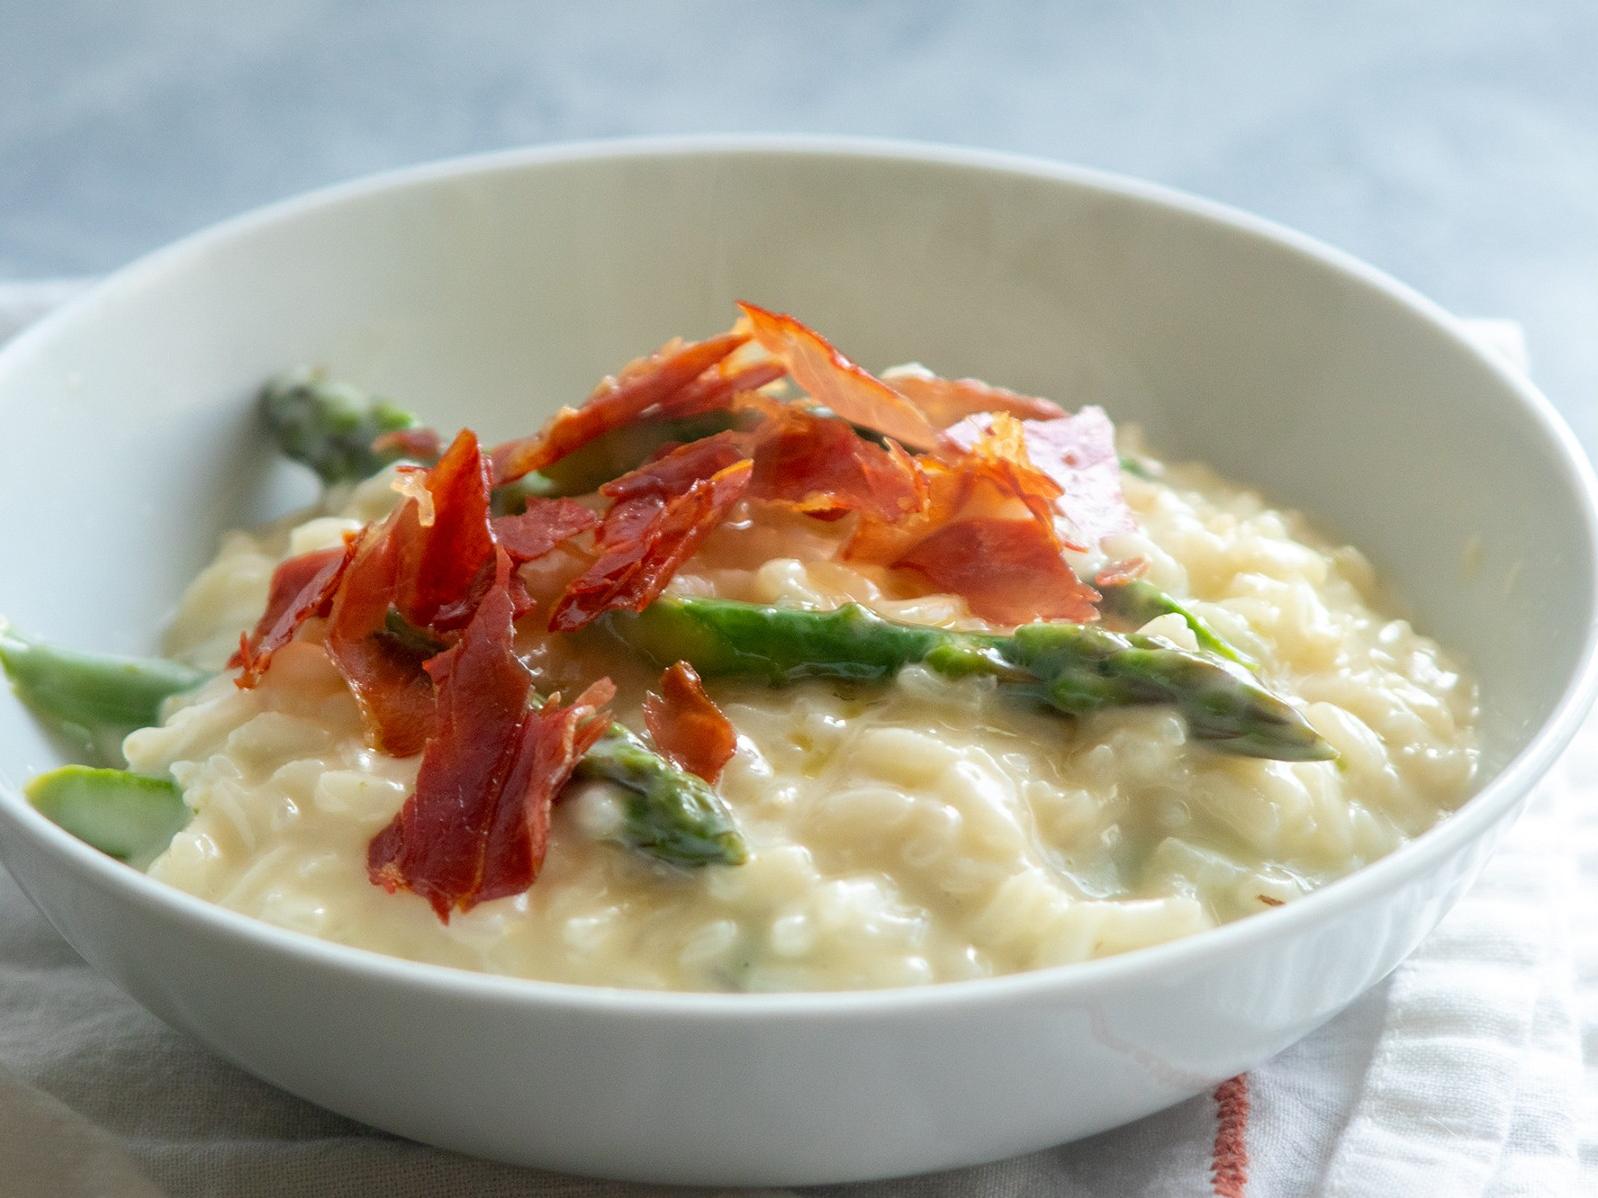  For an impressive and elegant dinner, meet our Champagne Risotto.